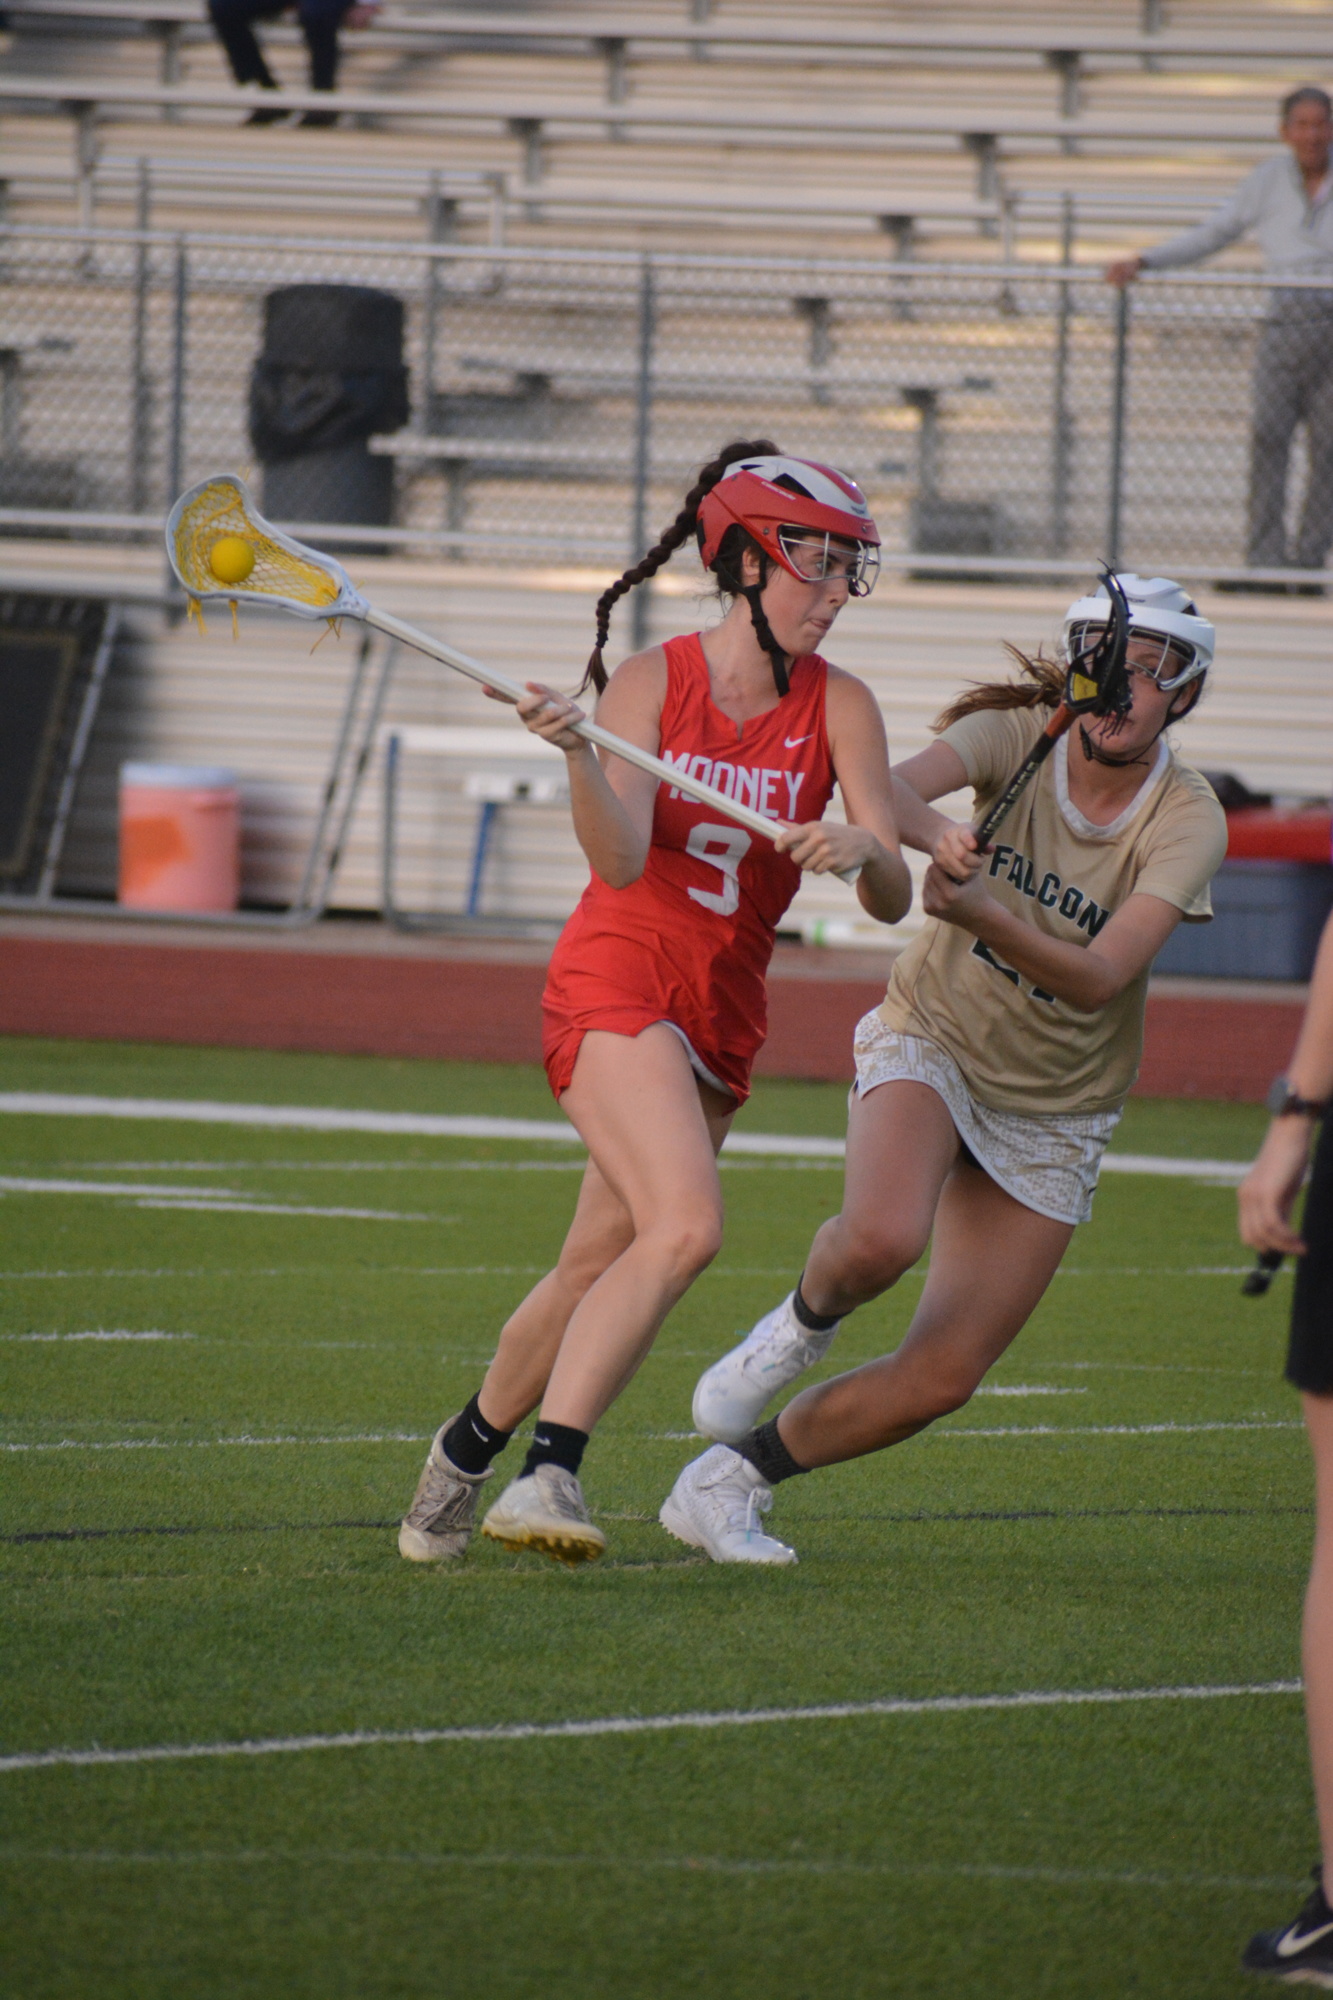 Cougars senior Molly Donaghy is the team's leading scorer. She had seven goals against Saint Stephen's on March 3.